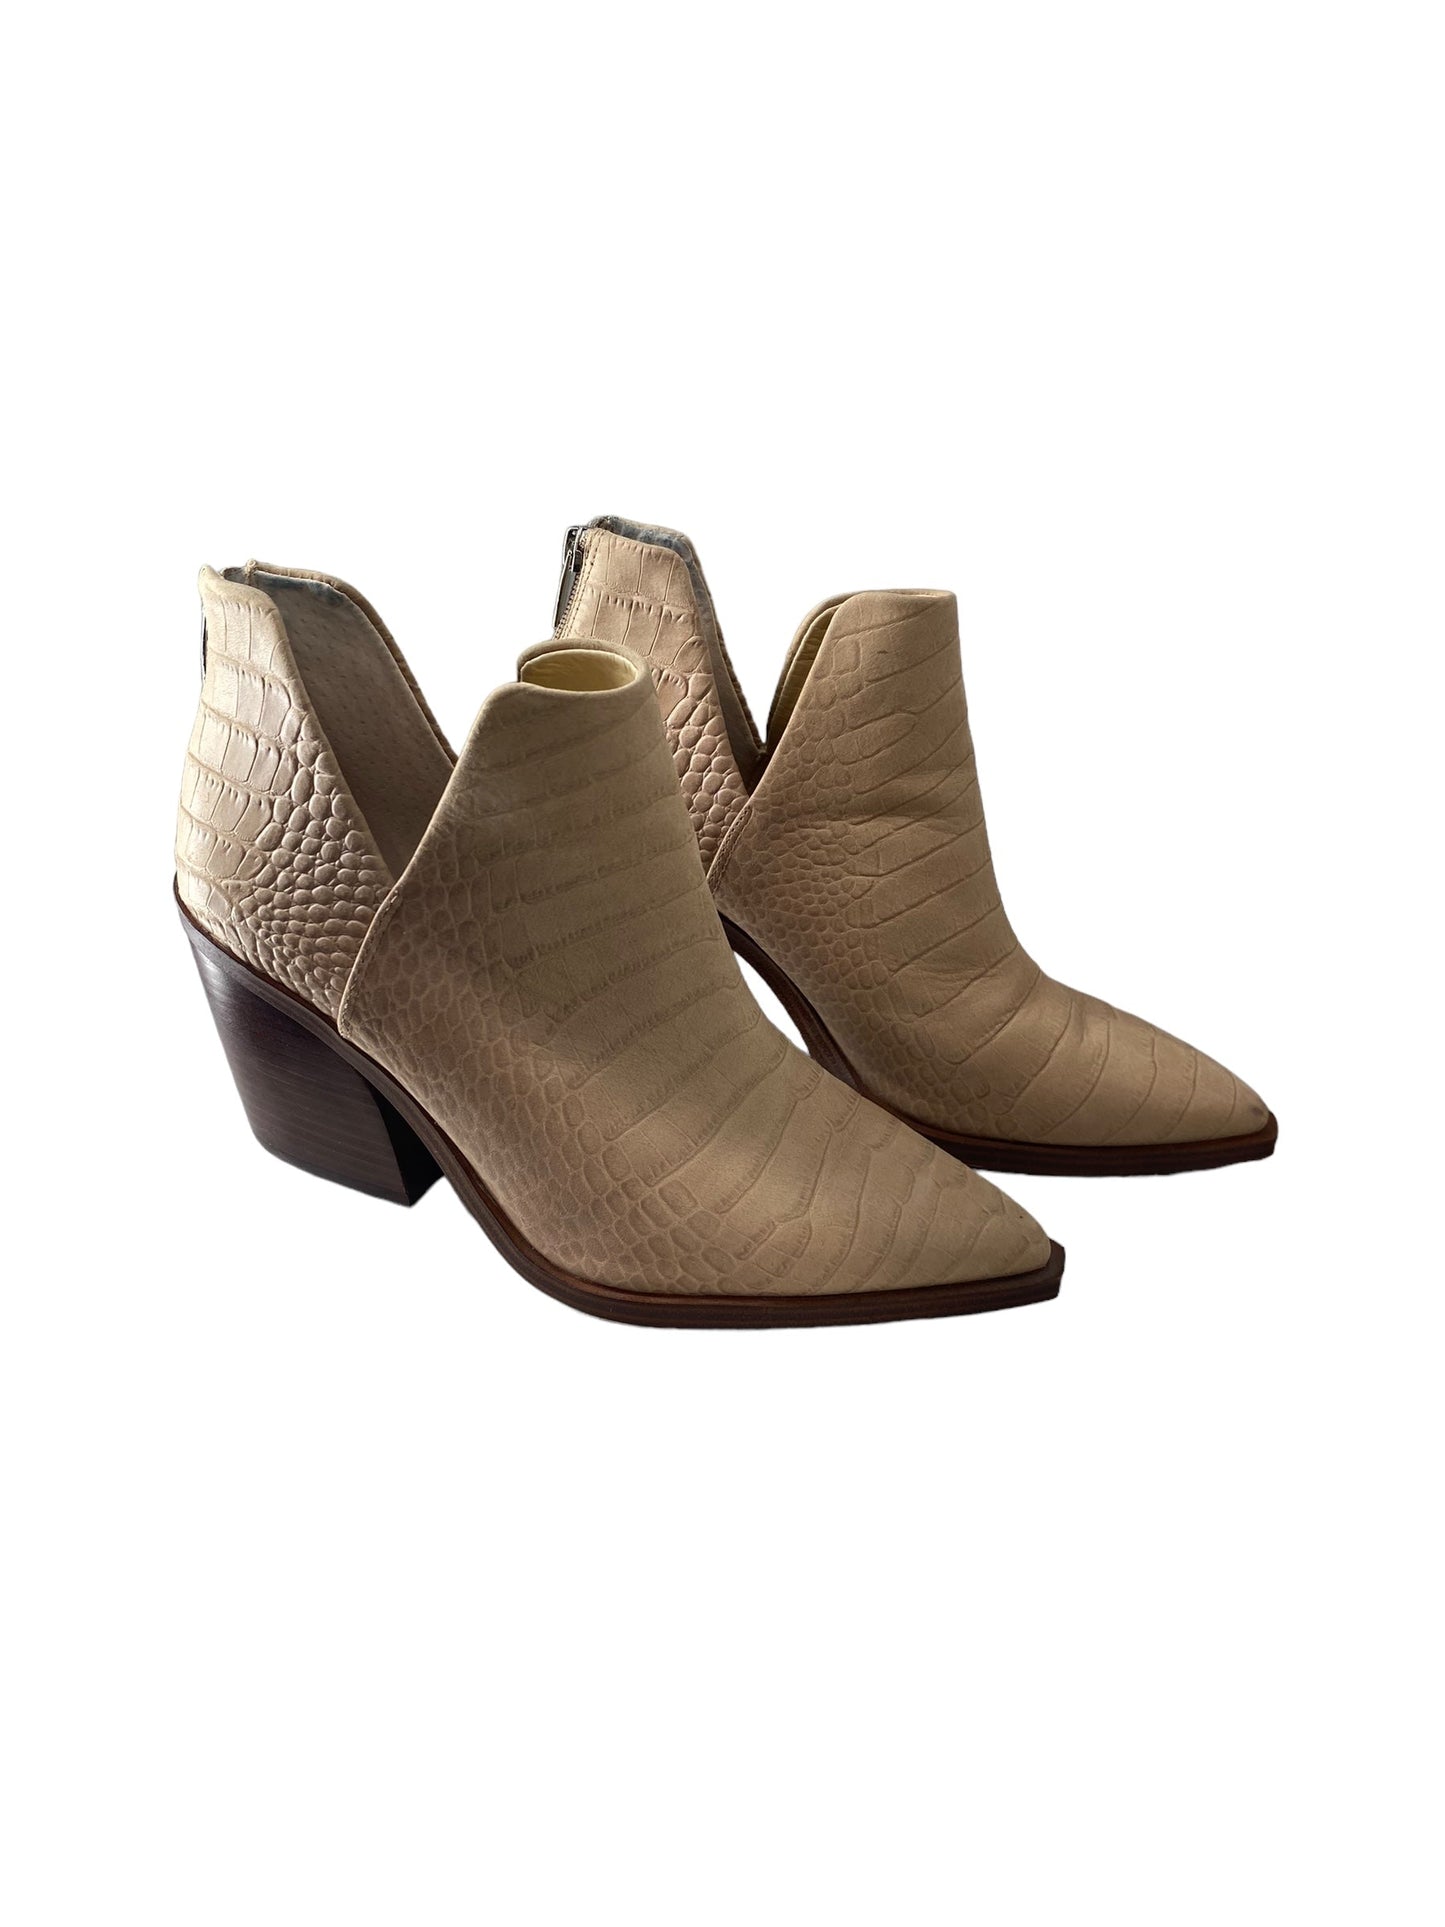 Taupe Boots Ankle Heels Vince Camuto, Size 9.5